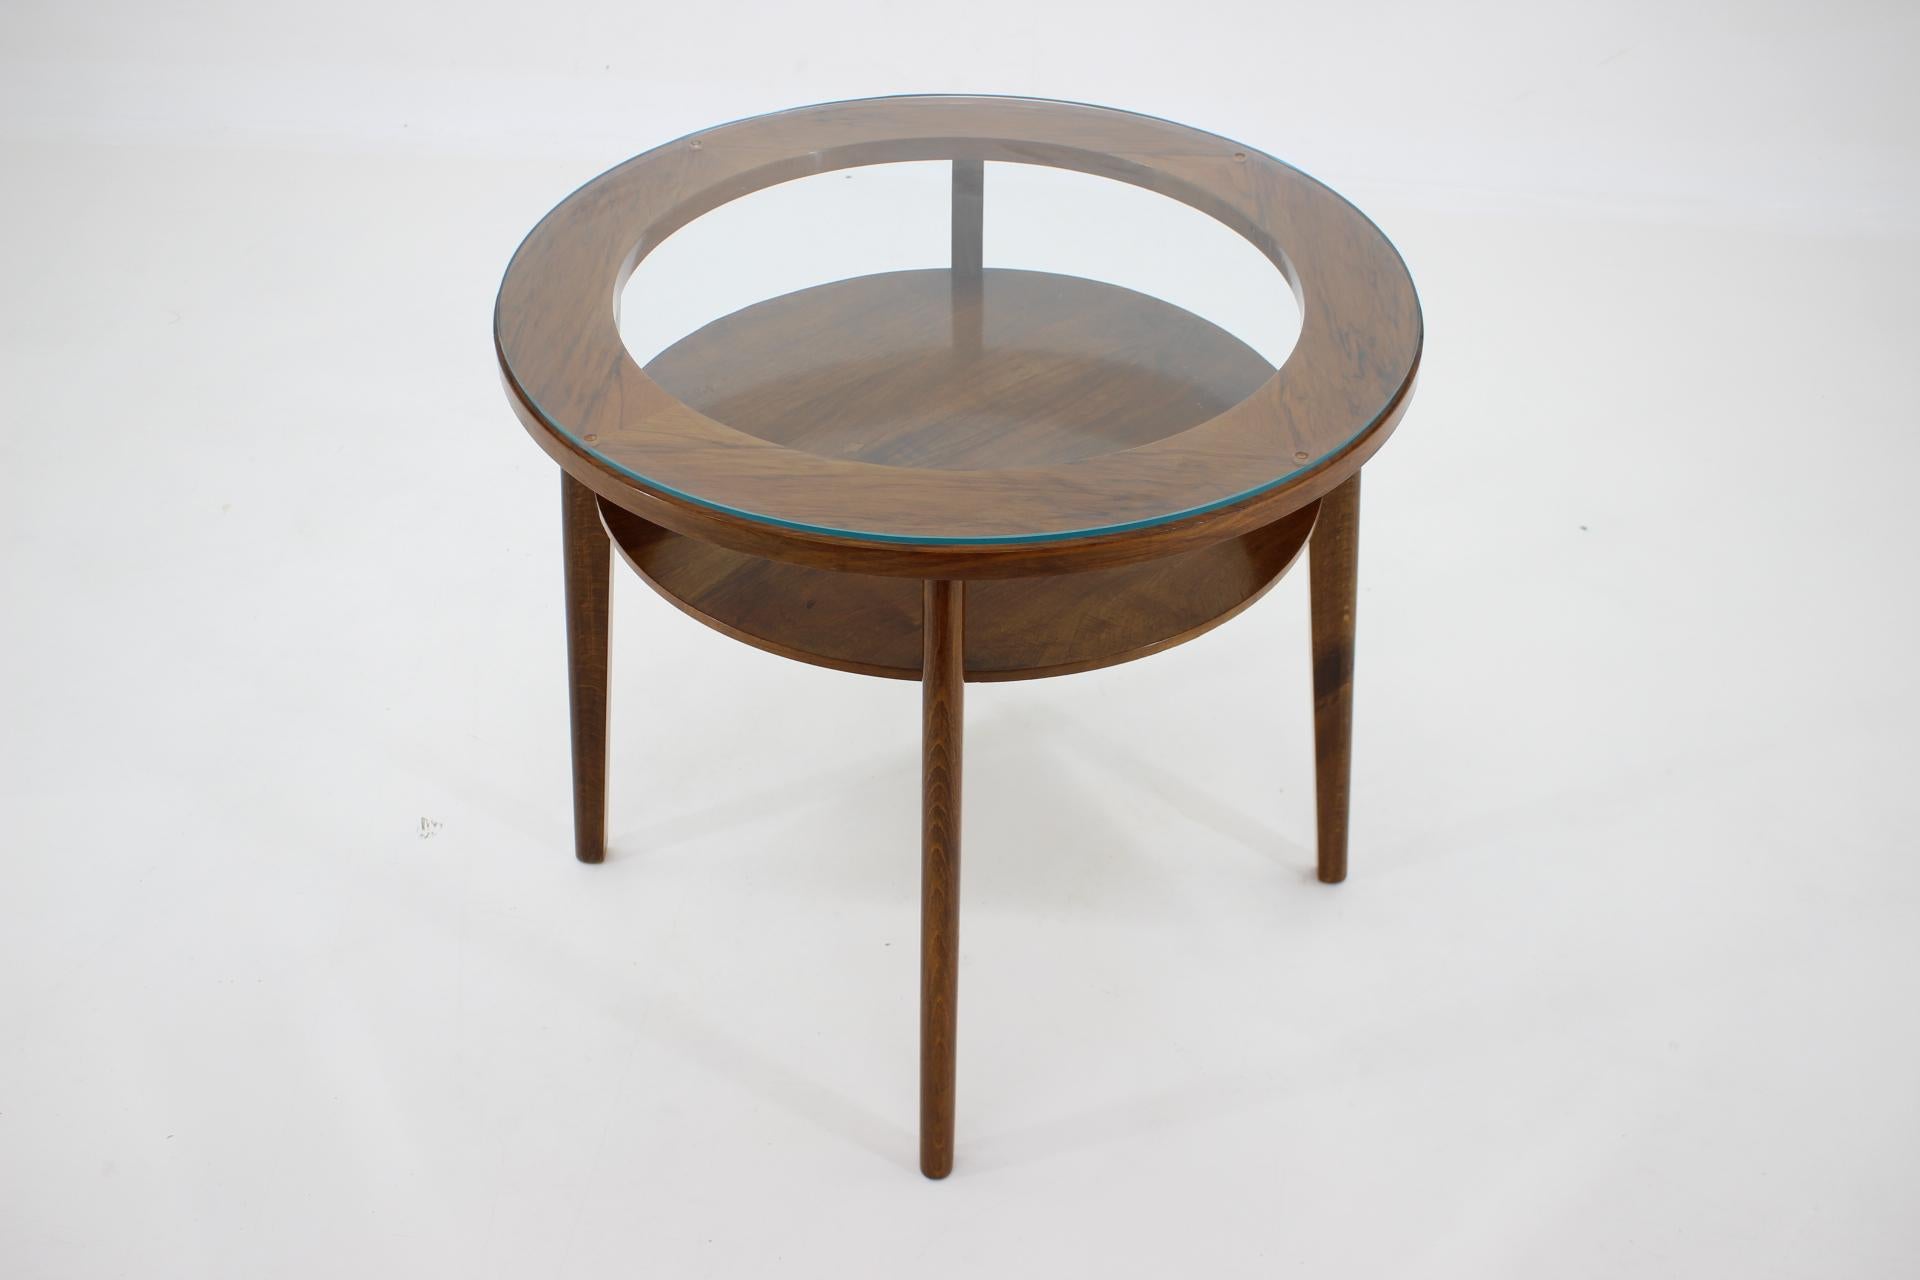 Glass Mid-Century Round Wooden Coffee Table, Czechoslovakia / 1960's For Sale